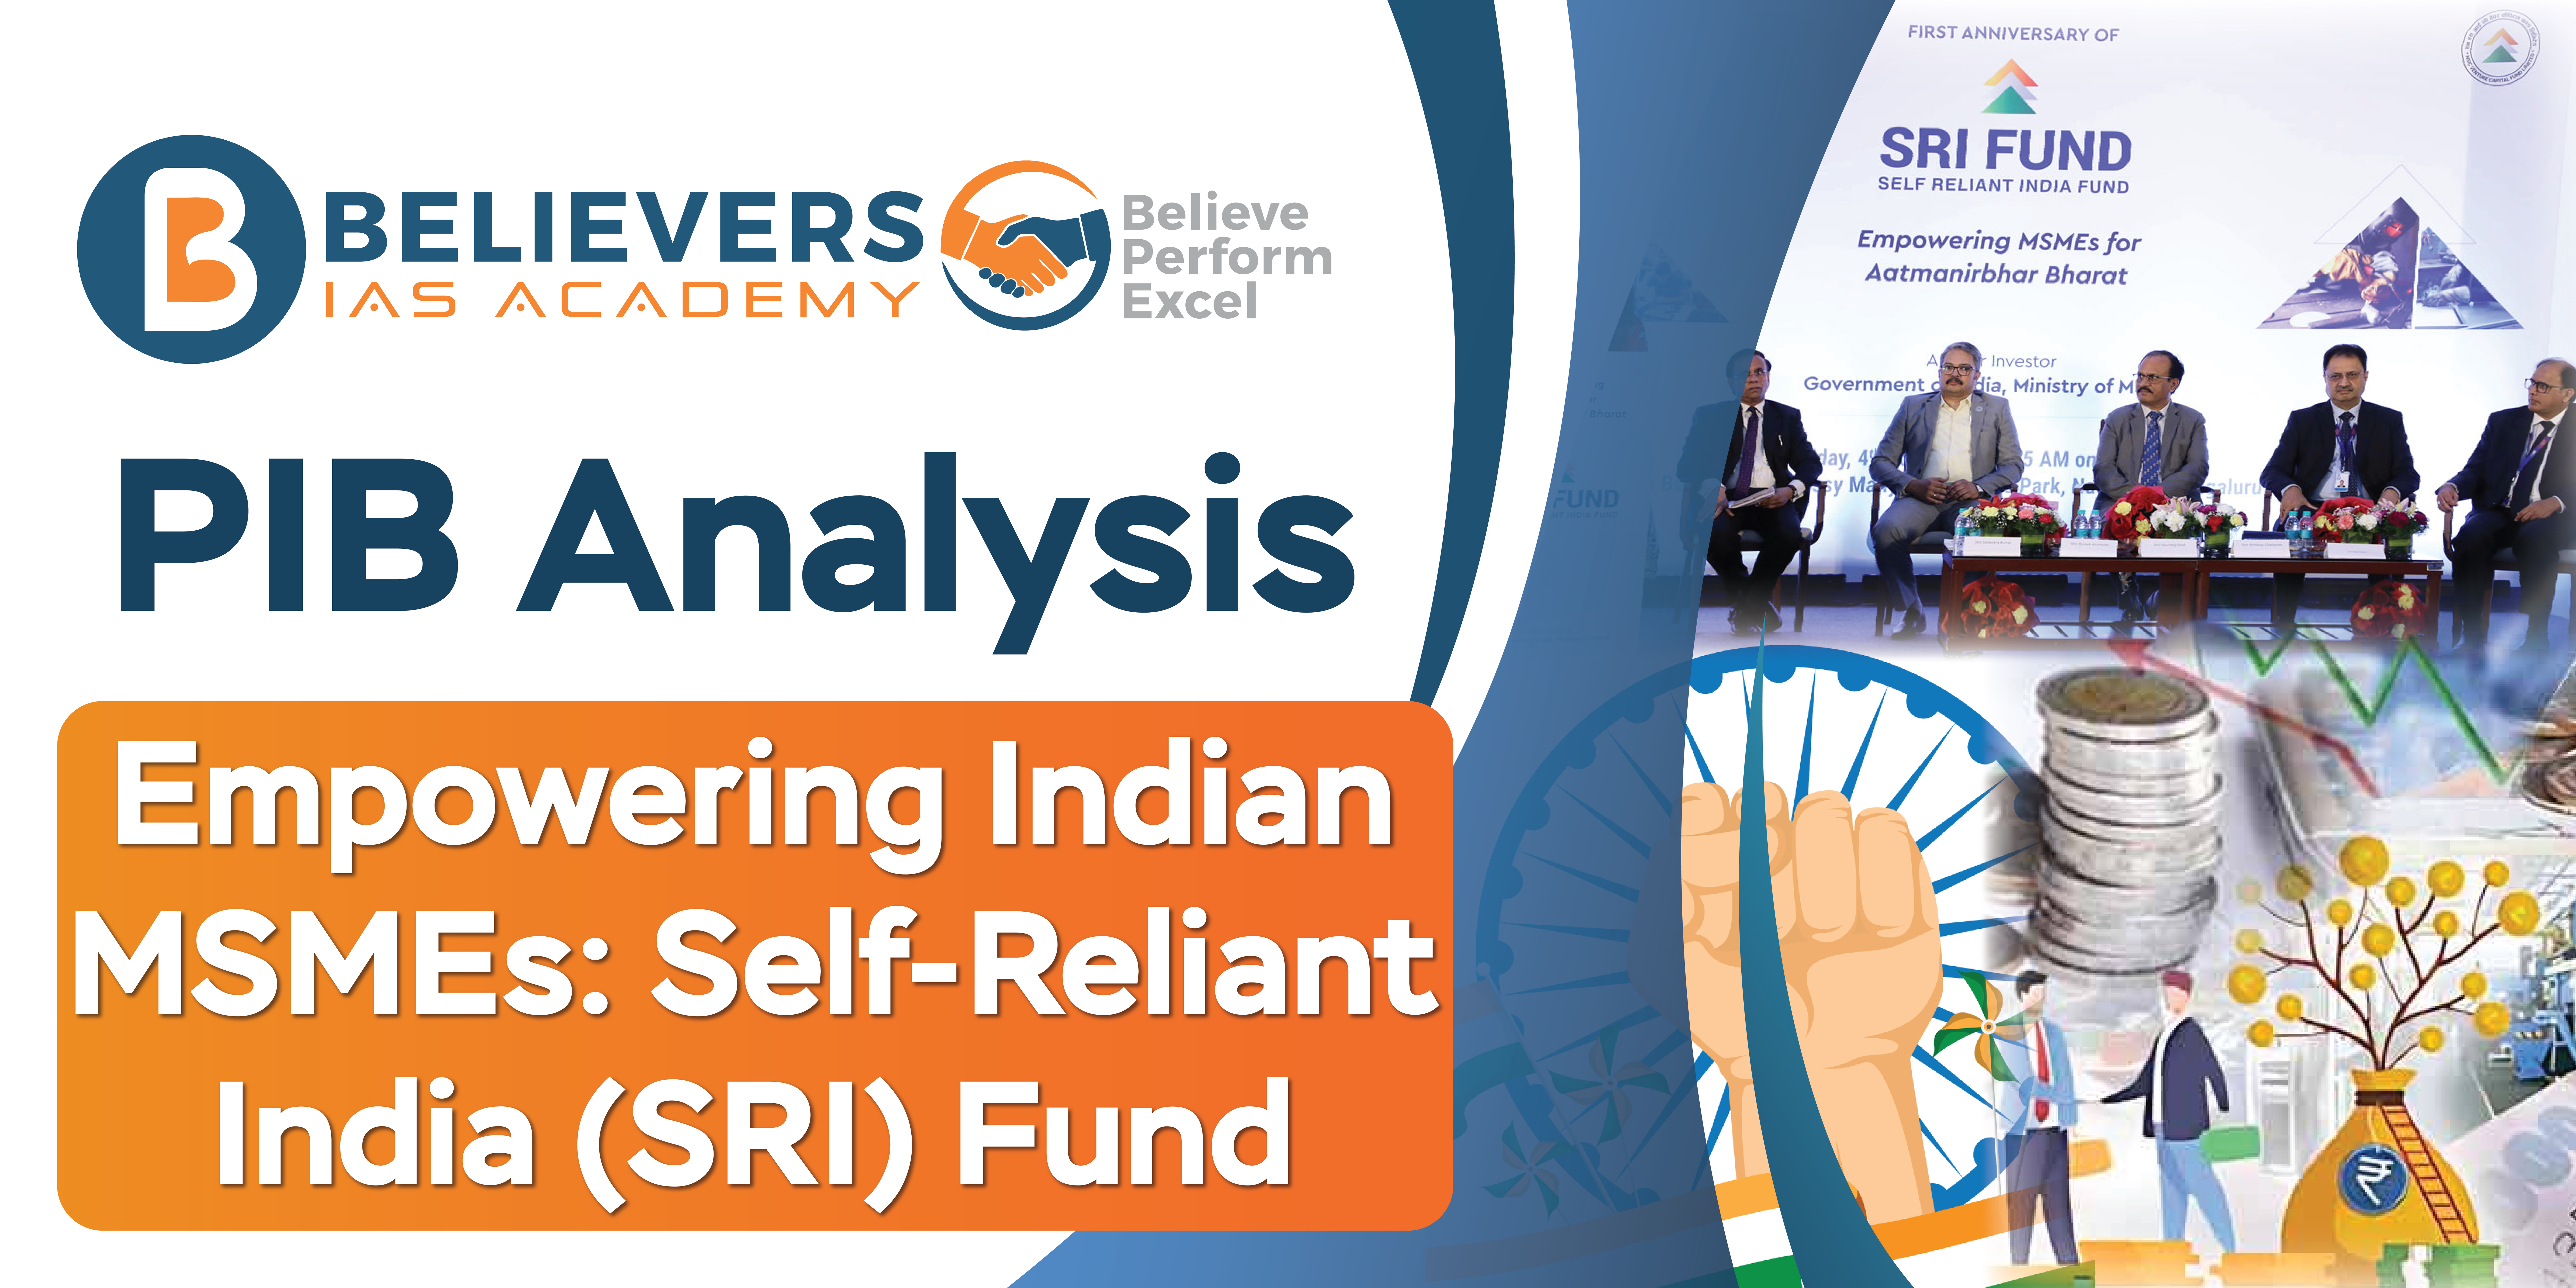 Empowering Indian MSMEs: Self-Reliant India (SRI) Fund